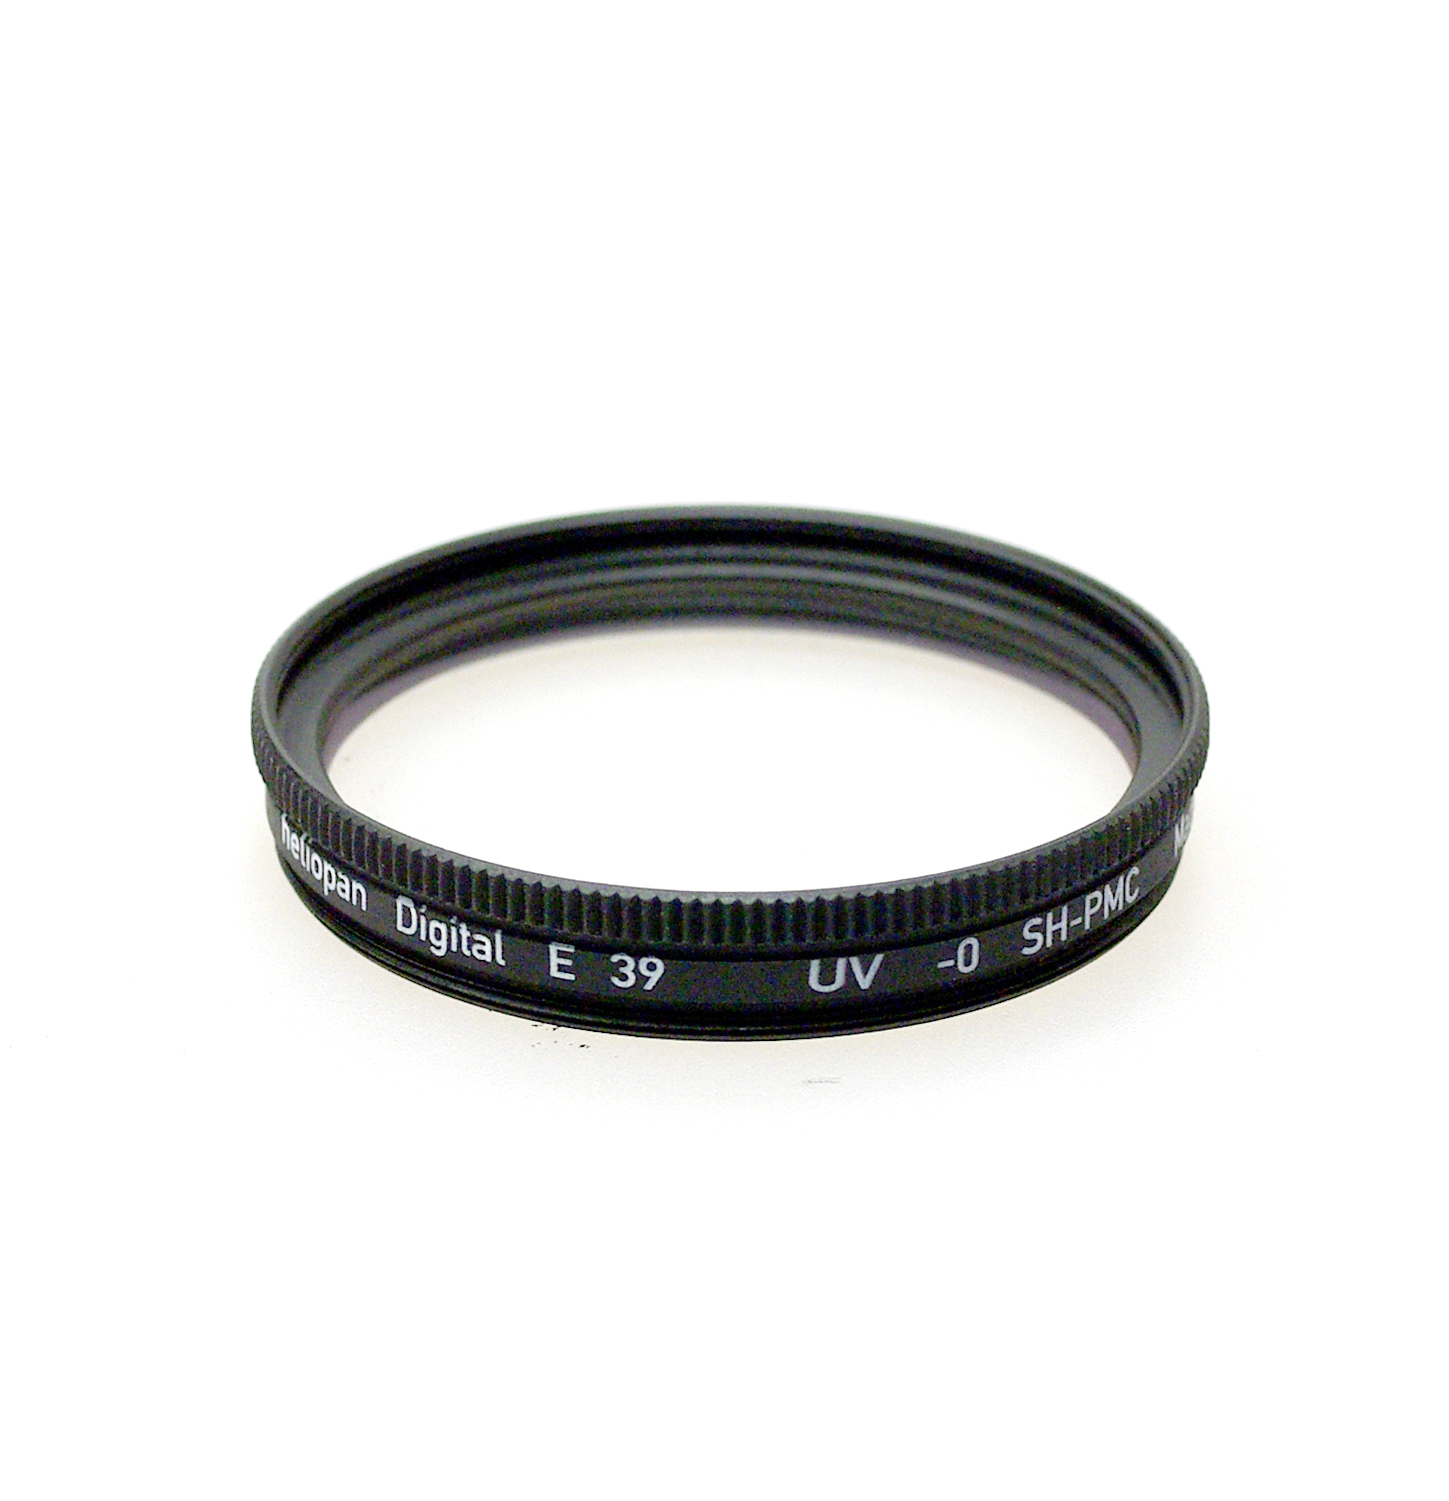 Heliopan sh-pmc multi coated uv protection filter